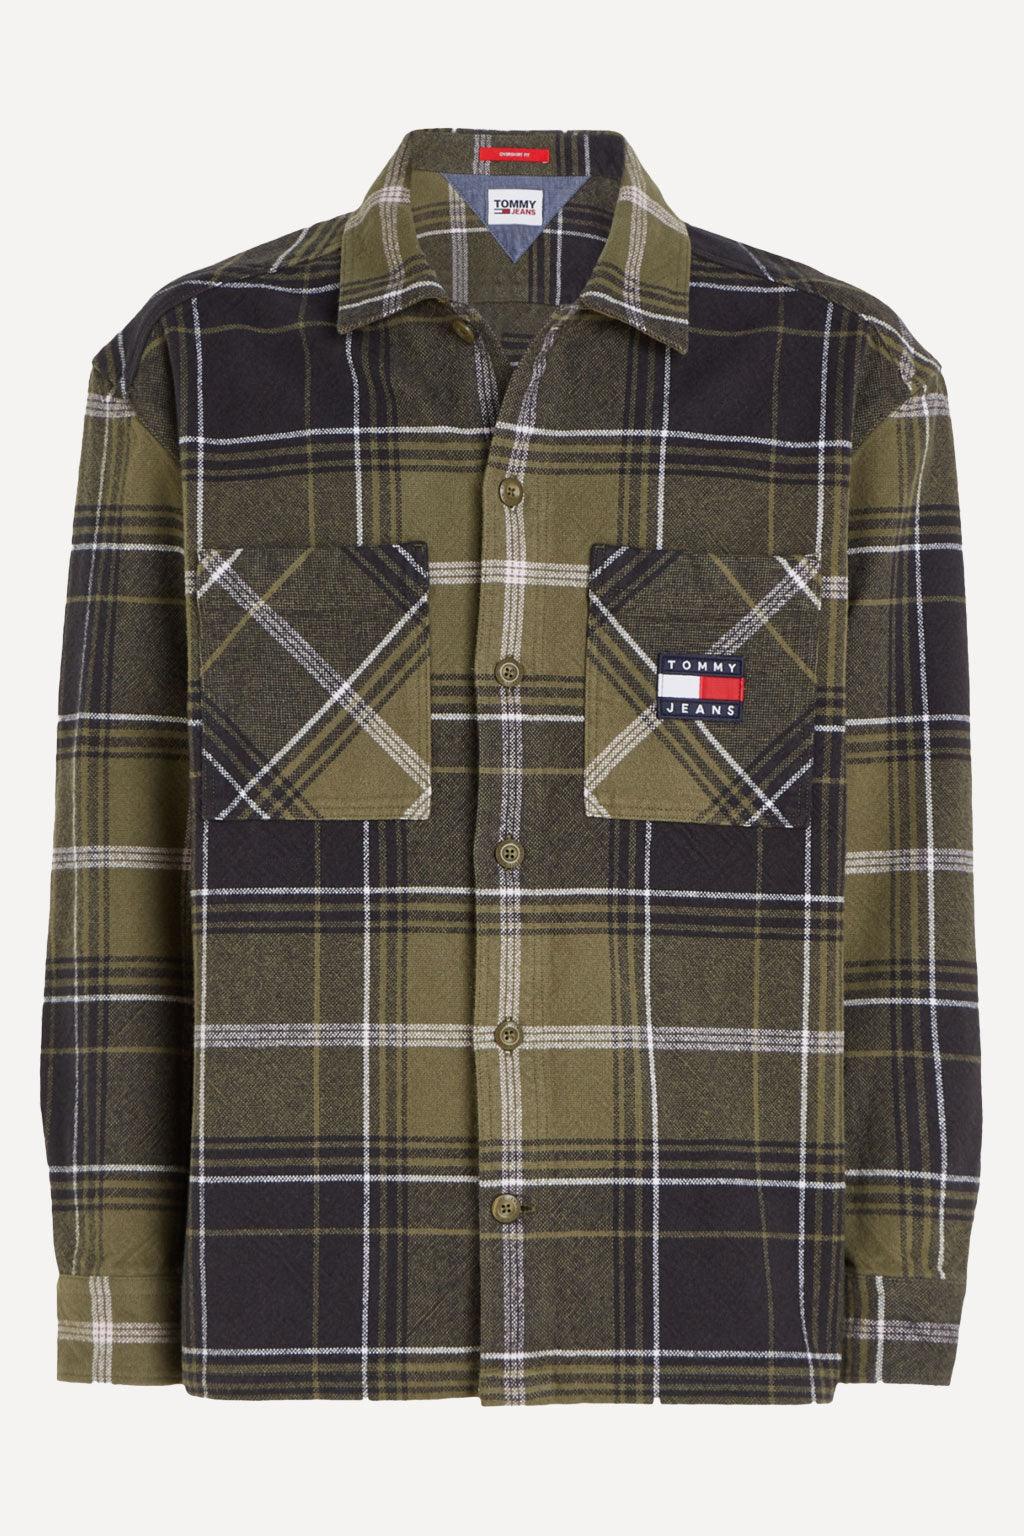 Tommy Jeans overshirt